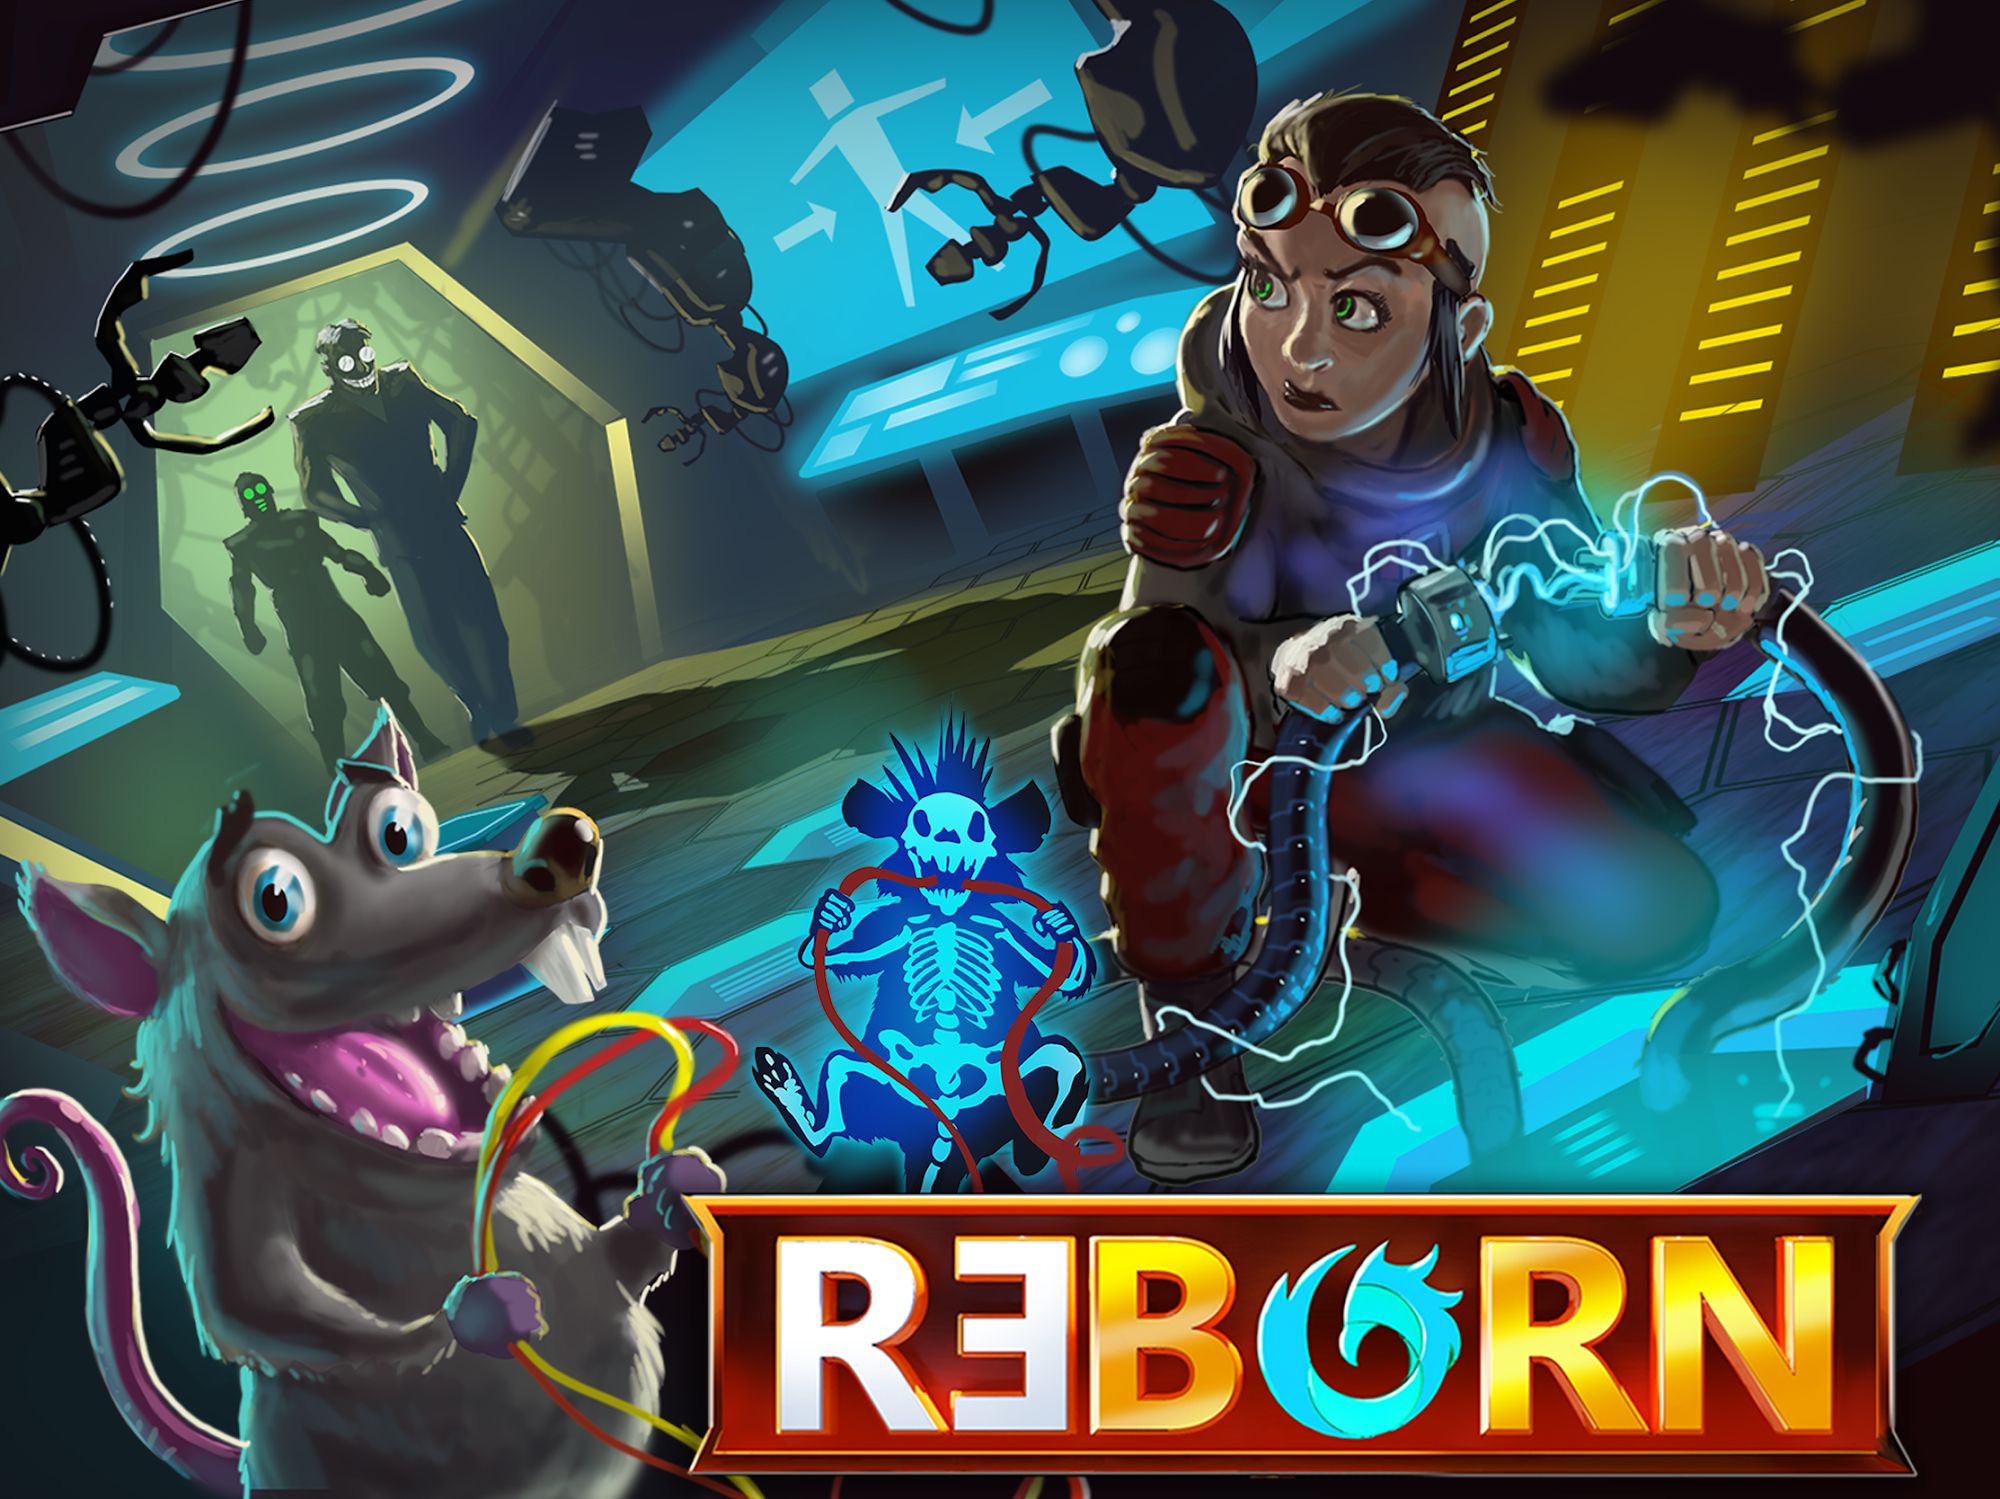 Scarica Adventure Reborn: story game point and click gratis per Android.